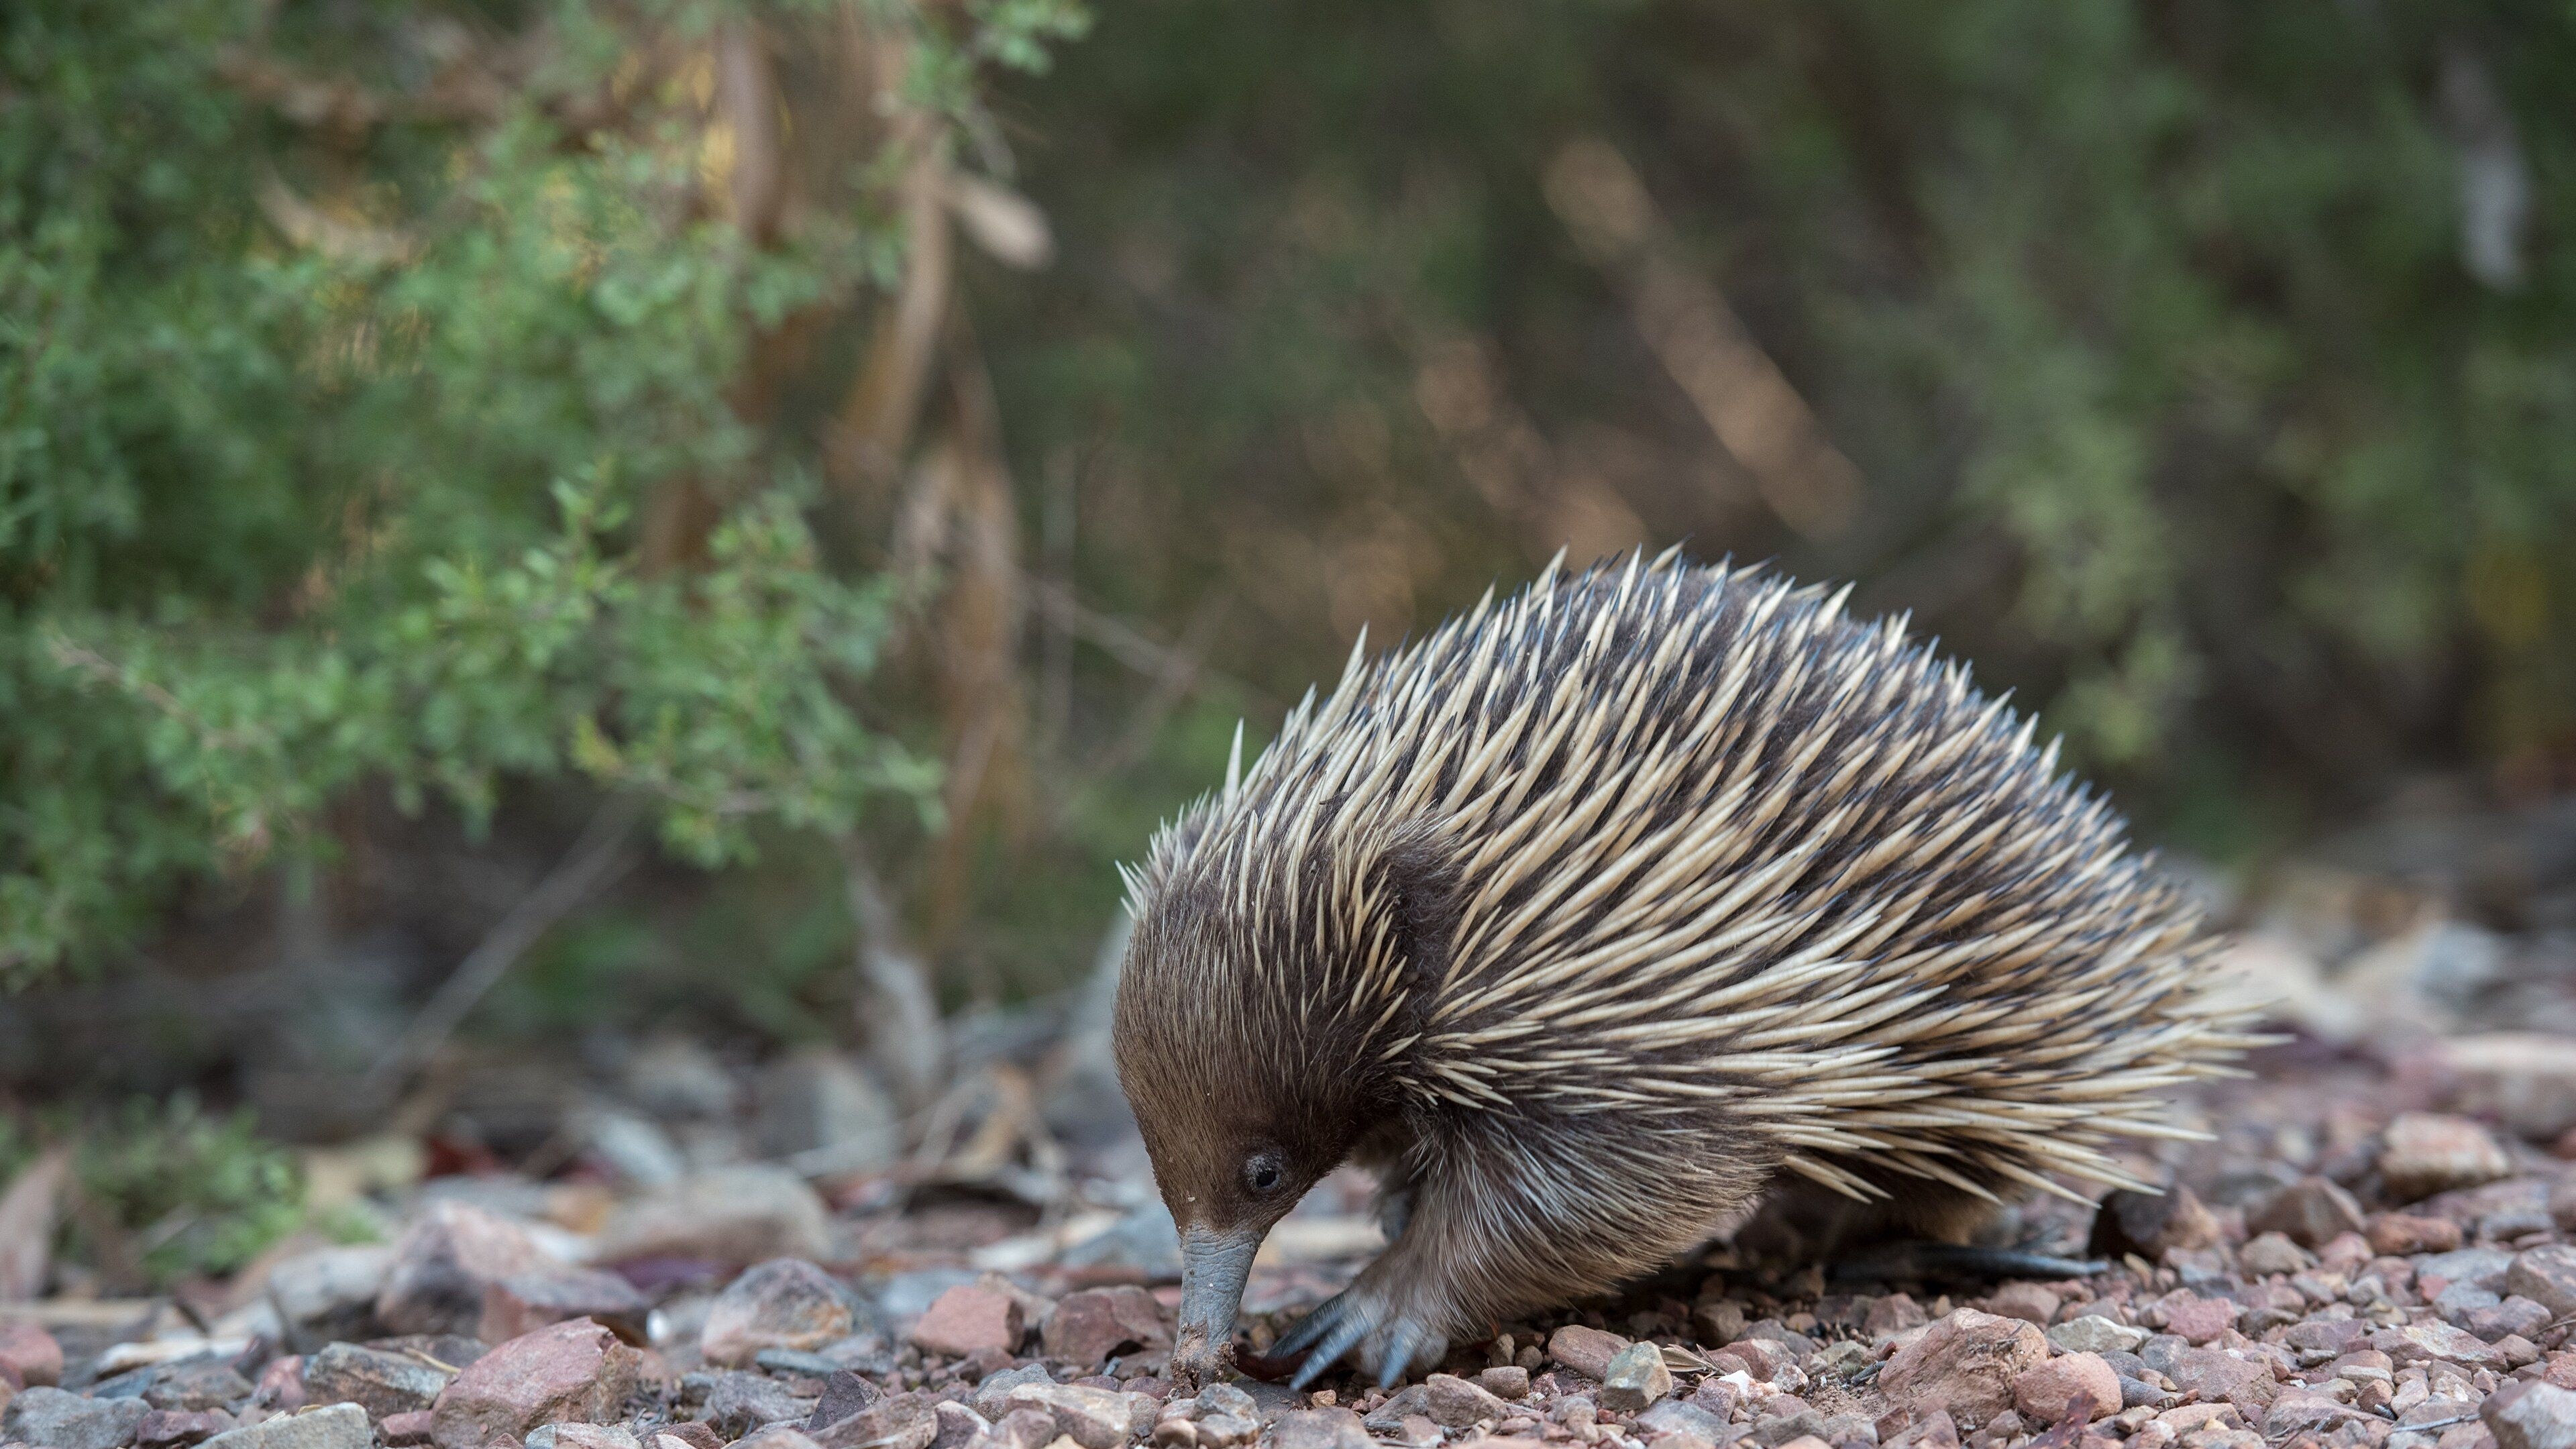 Quirky echidna, Australian native, Endearing spines, Background image, 3840x2160 4K Desktop